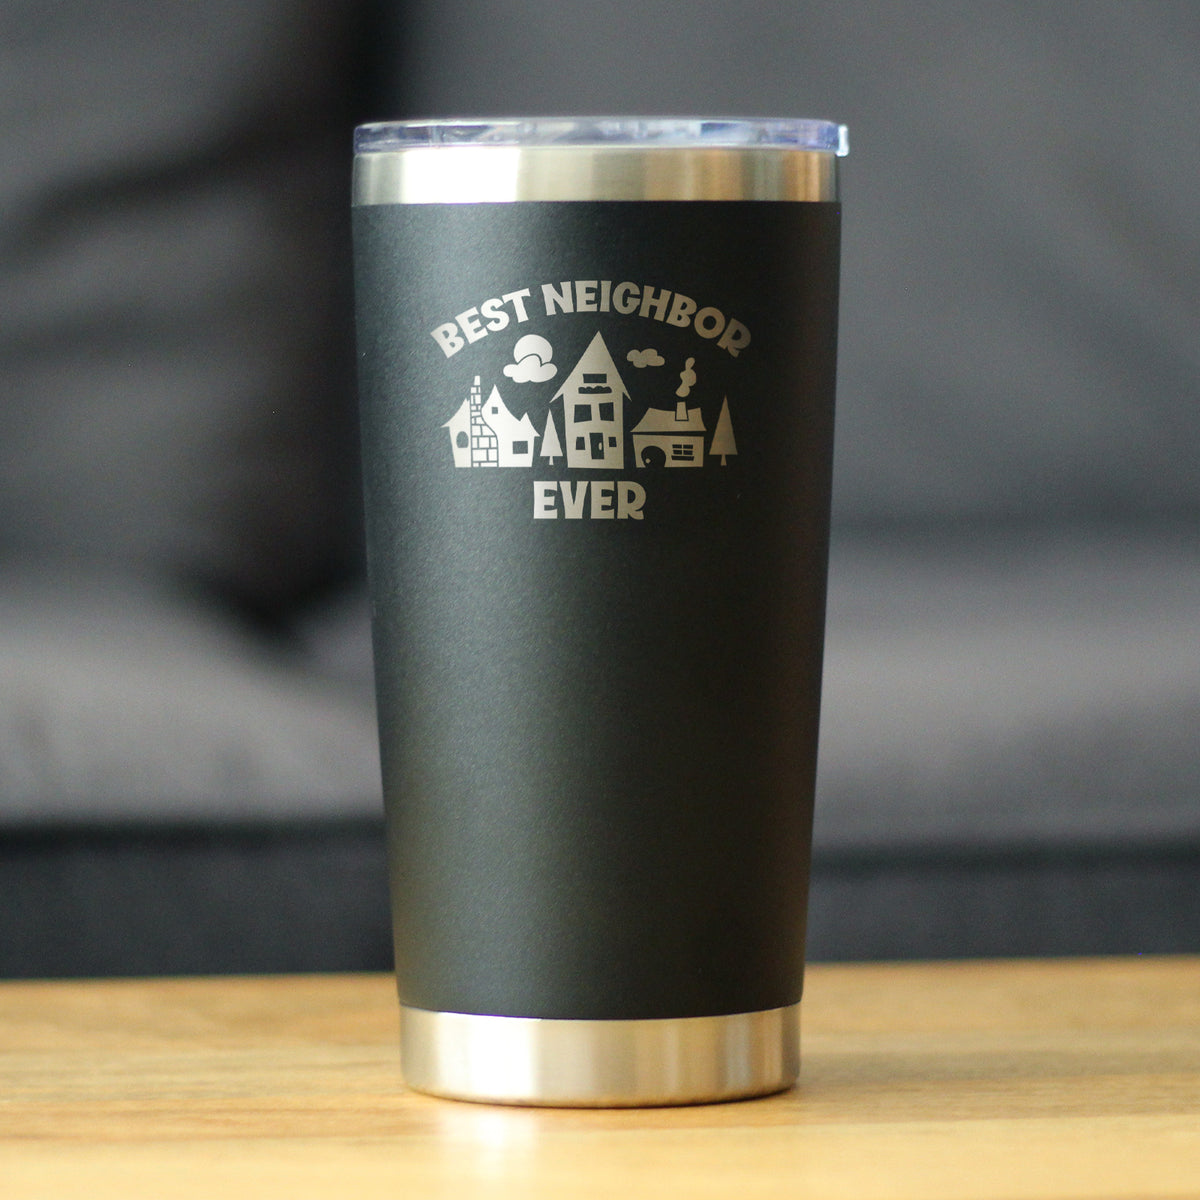 Best Neighbor Ever - Insulated Coffee Tumbler Cup with Sliding Lid - Stainless Steel Travel Mug - Fun Neighbor Gifts